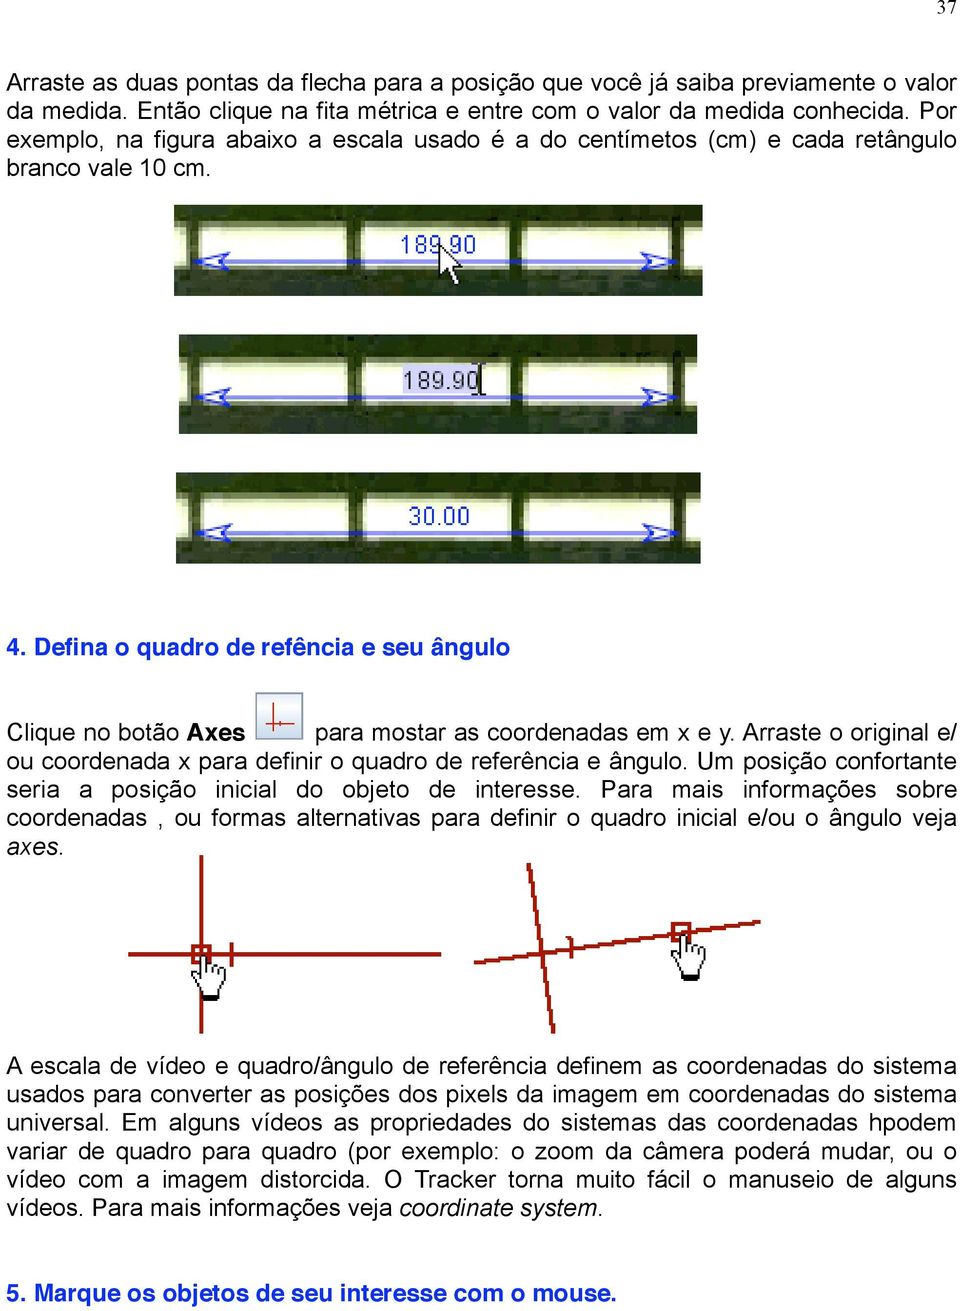 37 ag the two ends of the tape to positions that are a known world distance apart (for example, e ends of a Arraste meter Drag the stick as two duas or ends pontas other of the object da tape flecha